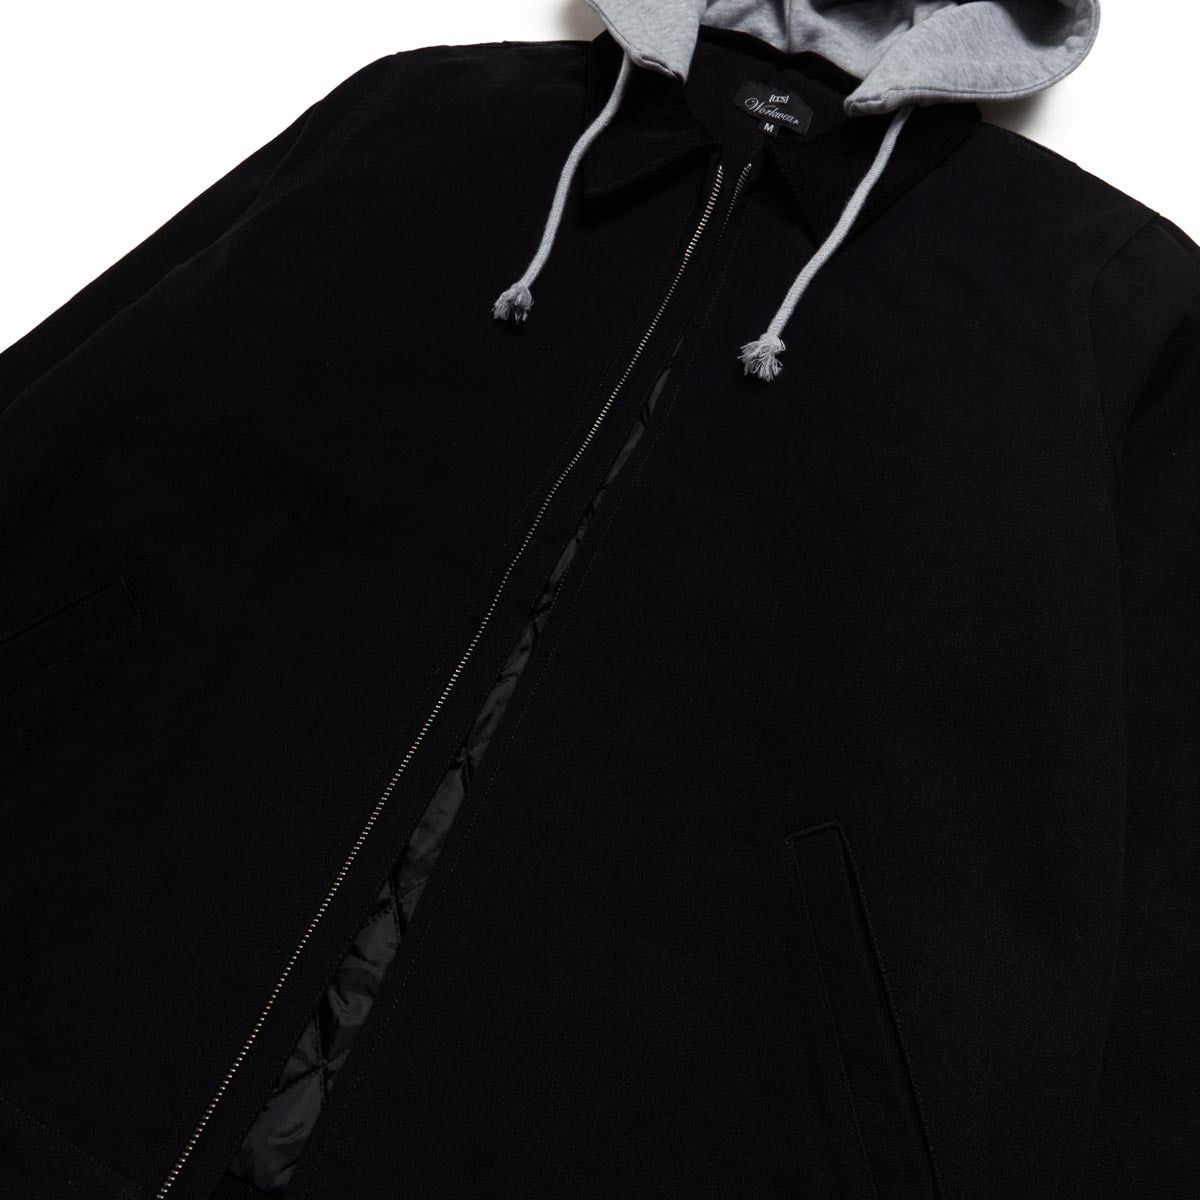 CCS Heavy Canvas Insulated Work Jacket - Black image 7